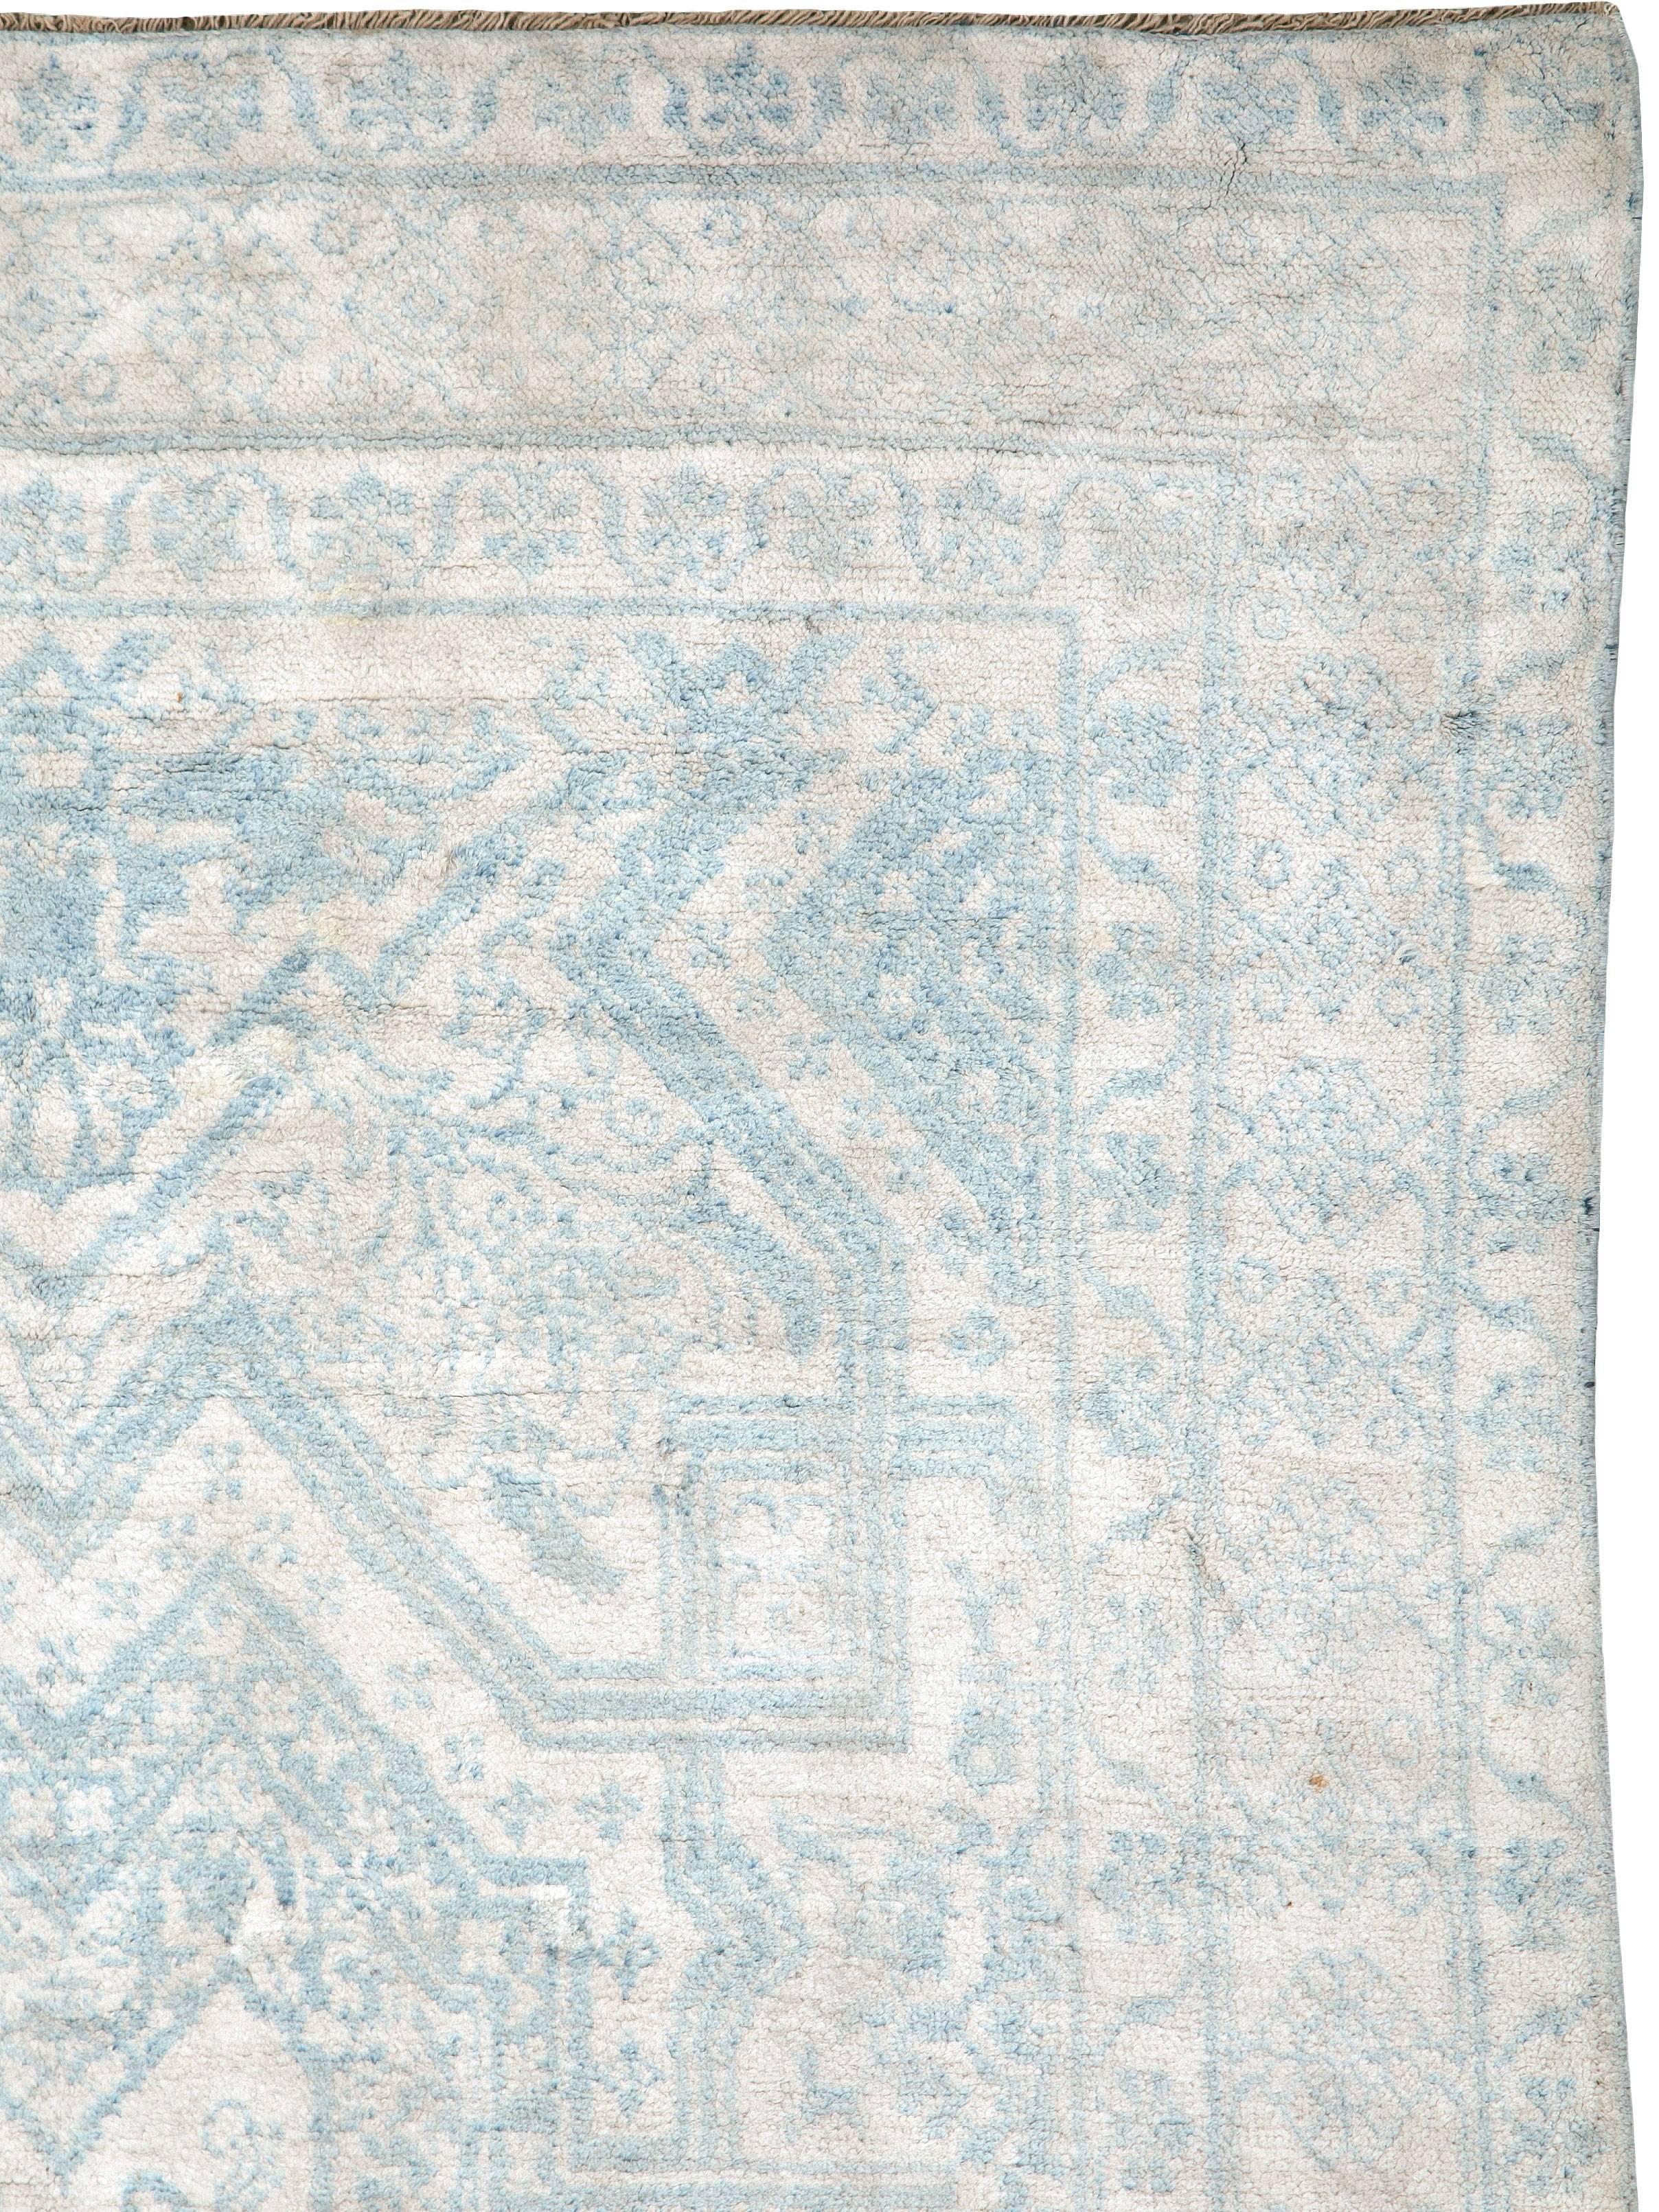 A vintage Indian cotton Agra carpet from the second quarter of the 20th century.